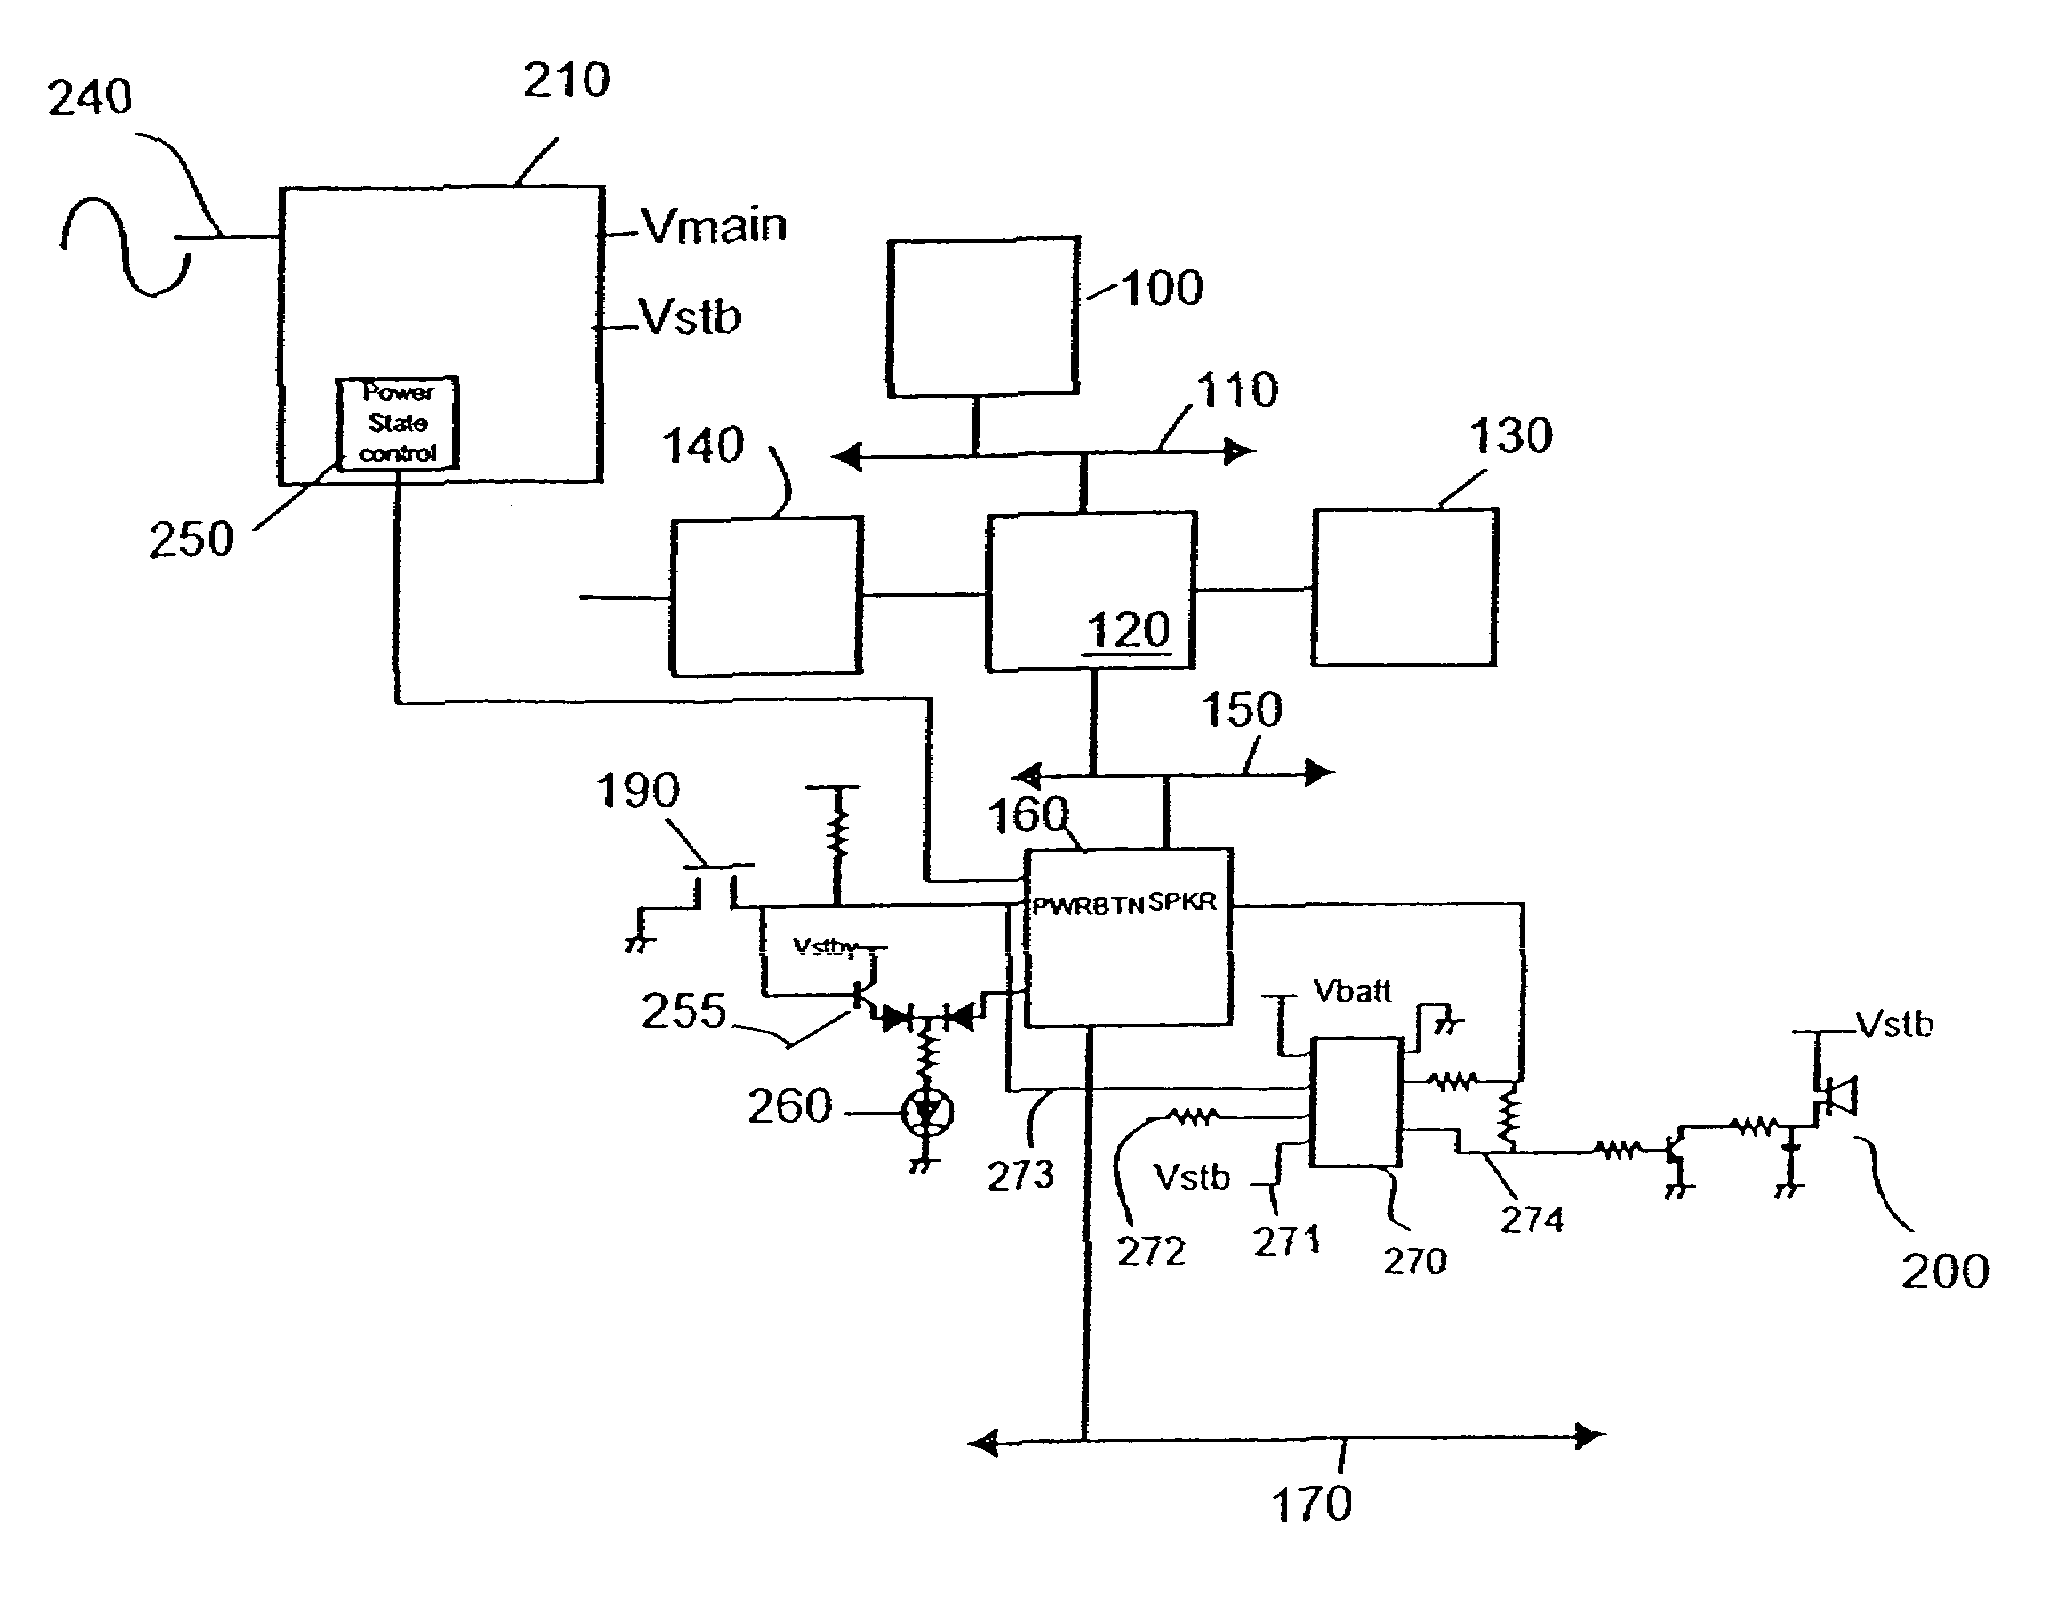 Electronic apparatus having improved diagnostic interface